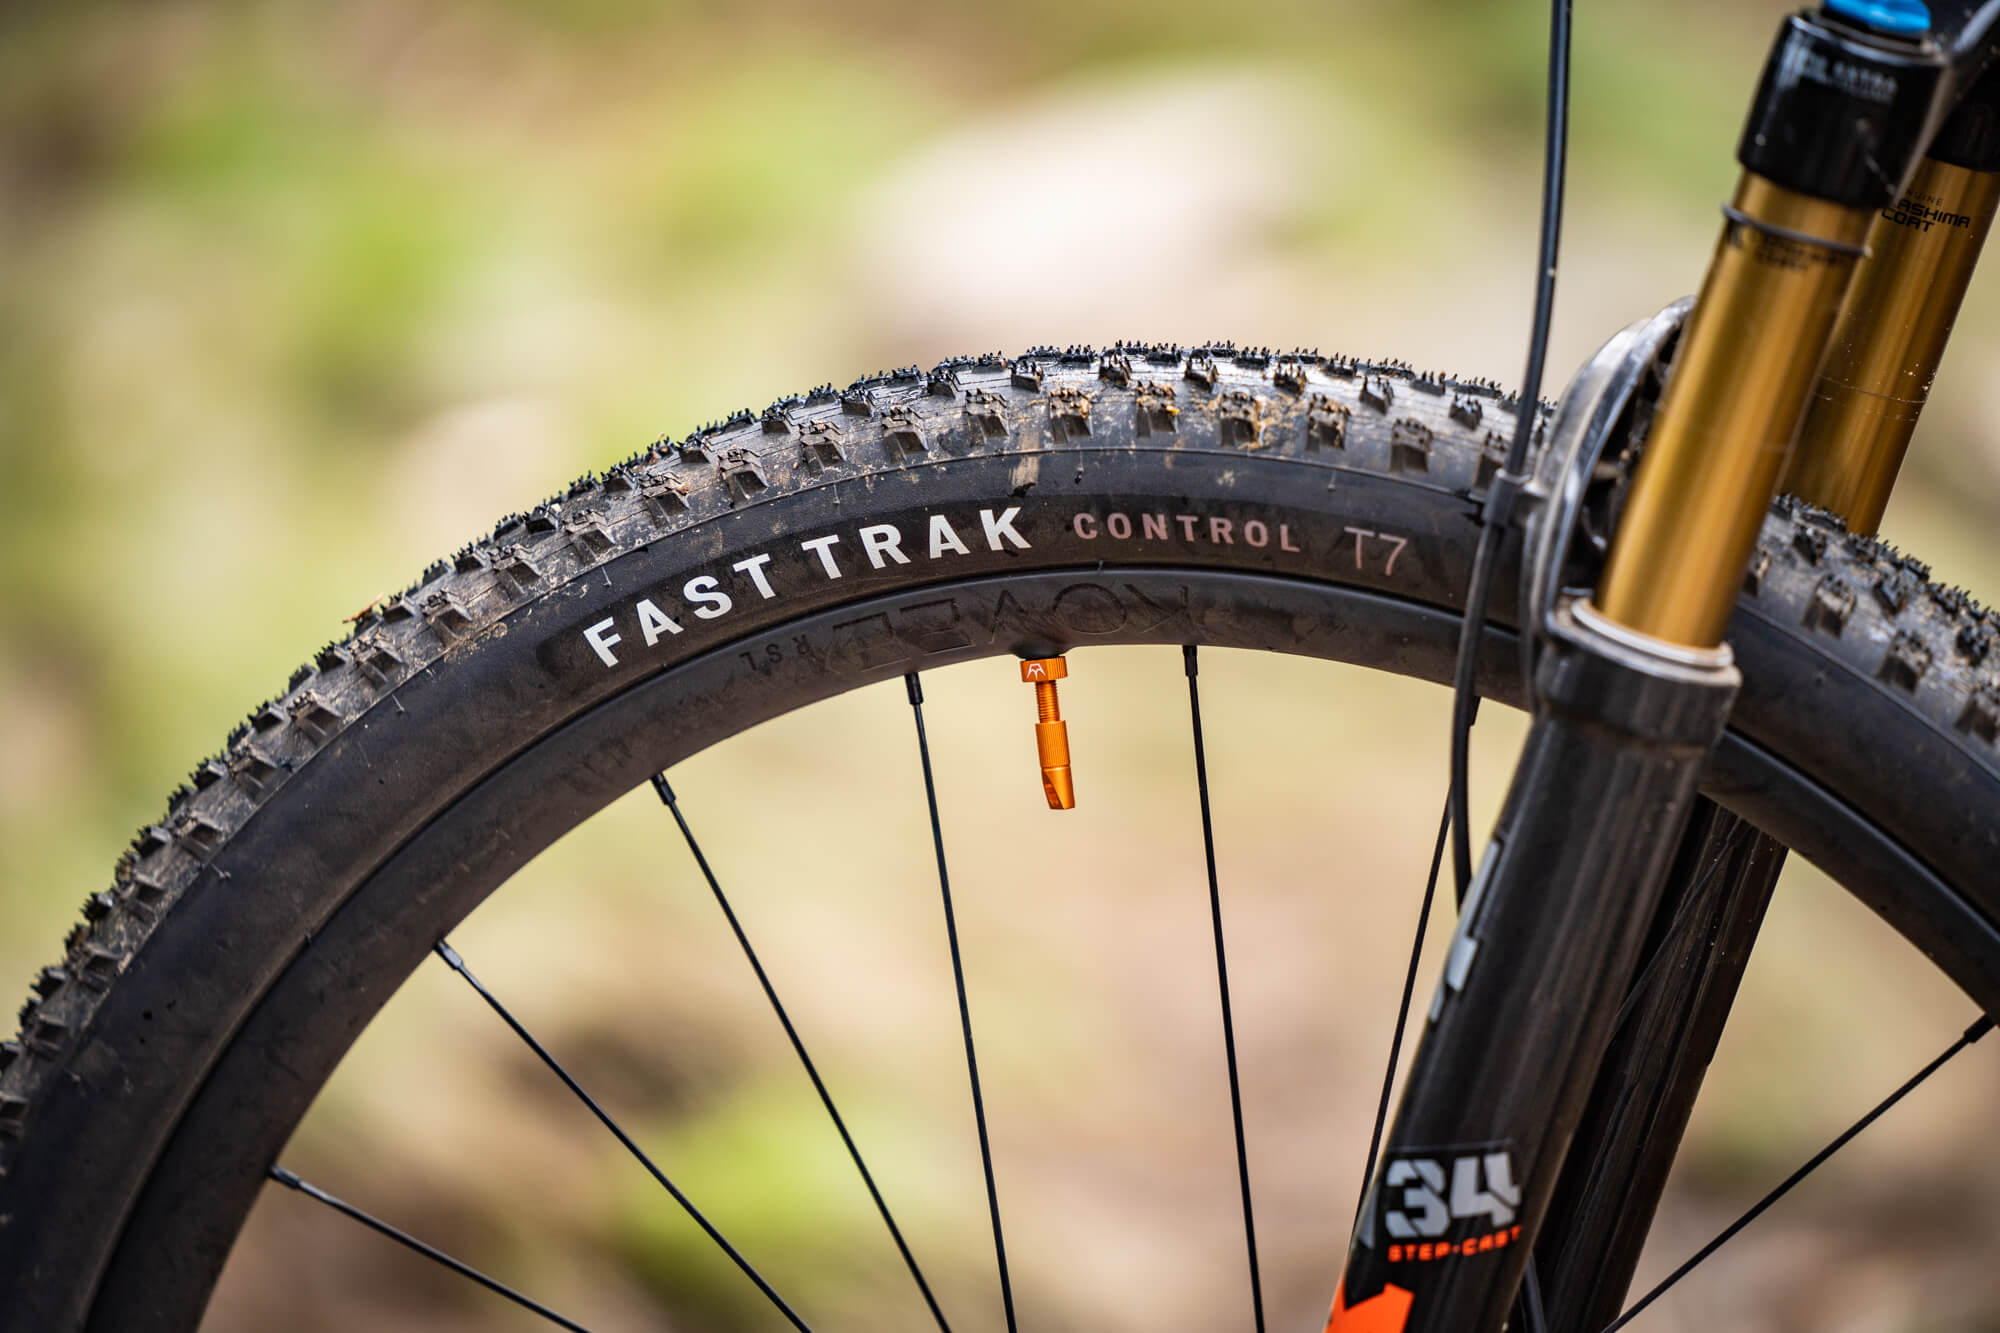 specialized fast trak control t7 and t5 tyres